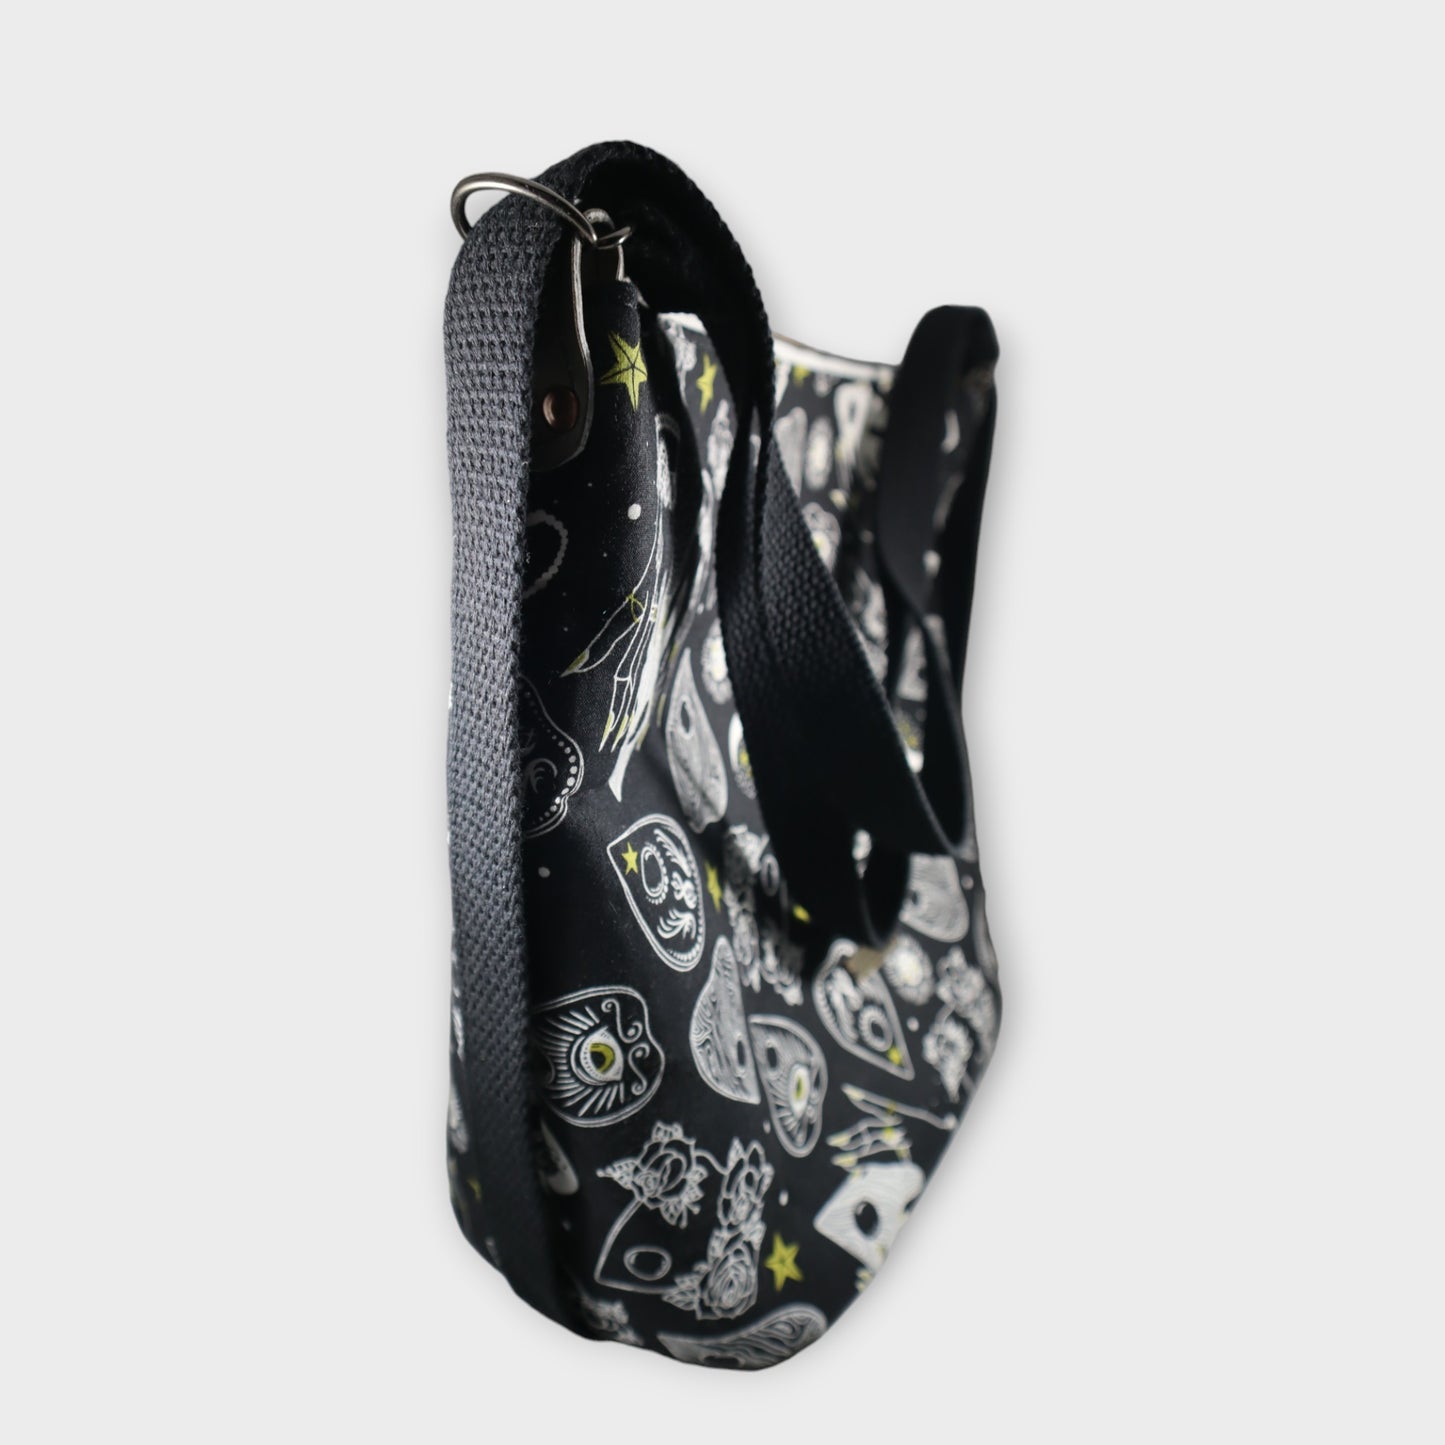 Handcrafted convertible shoulder purse to backpack Ouija witchy floral